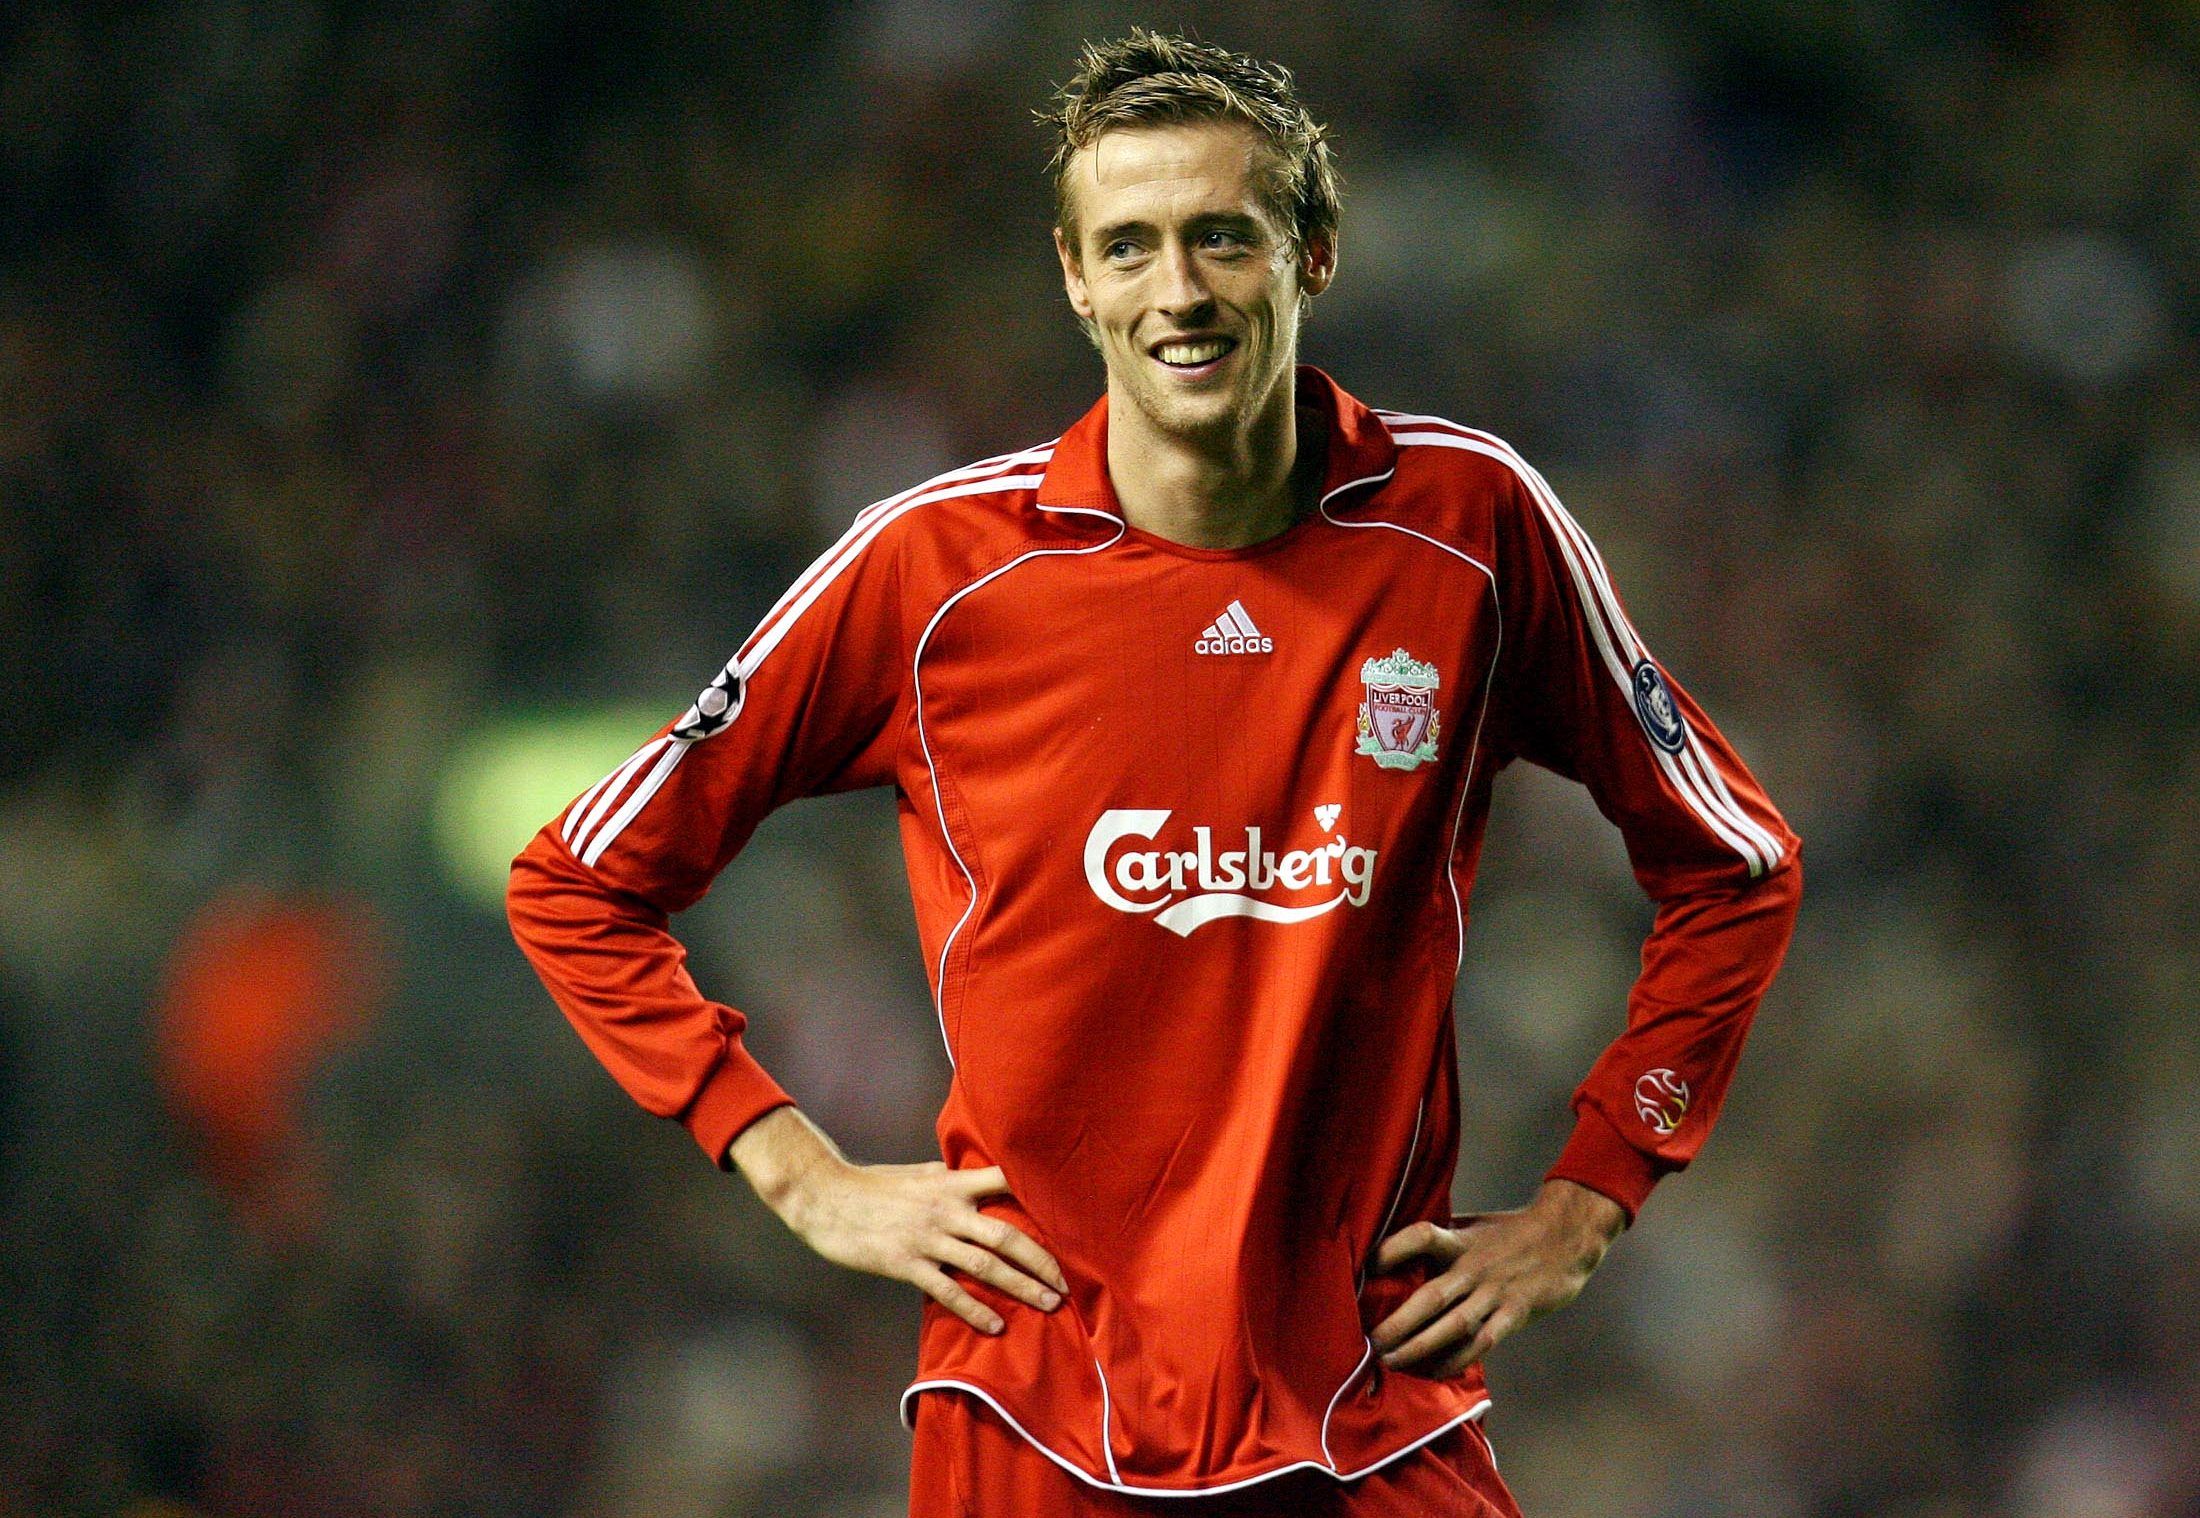 Football - Liverpool v Besiktas UEFA Champions League Group Stage Matchday Four Group A - Anfield, Liverpool, England - 6/11/07 
Liverpool's Peter Crouch during the game 
Mandatory Credit: Action Images / Carl Recine 
Livepic